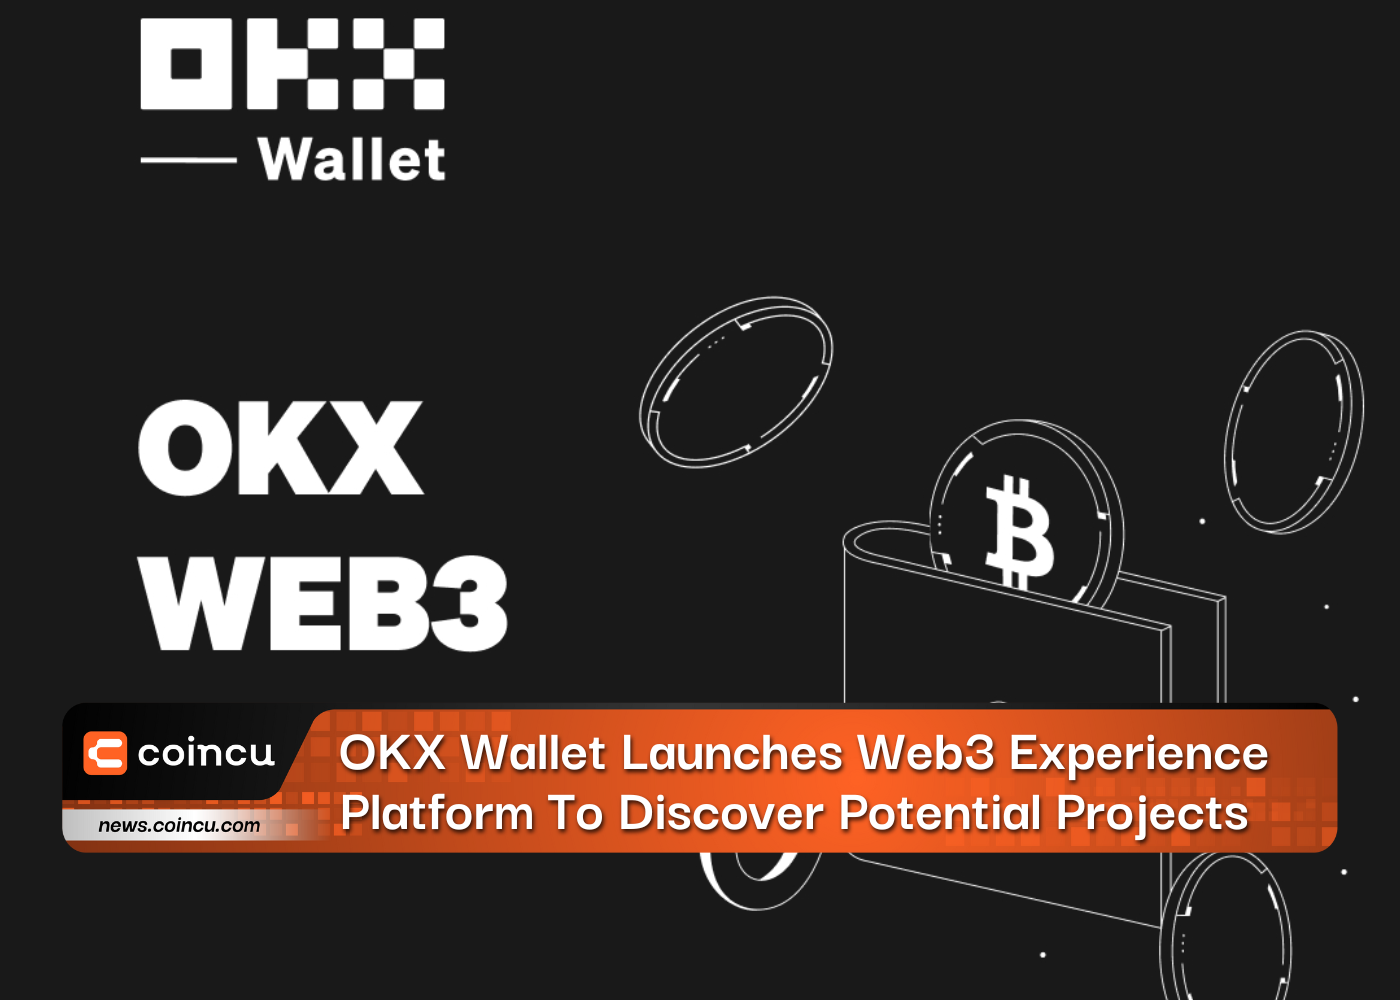 OKX Wallet Launches Web3 Experience Platform To Discover Potential Projects